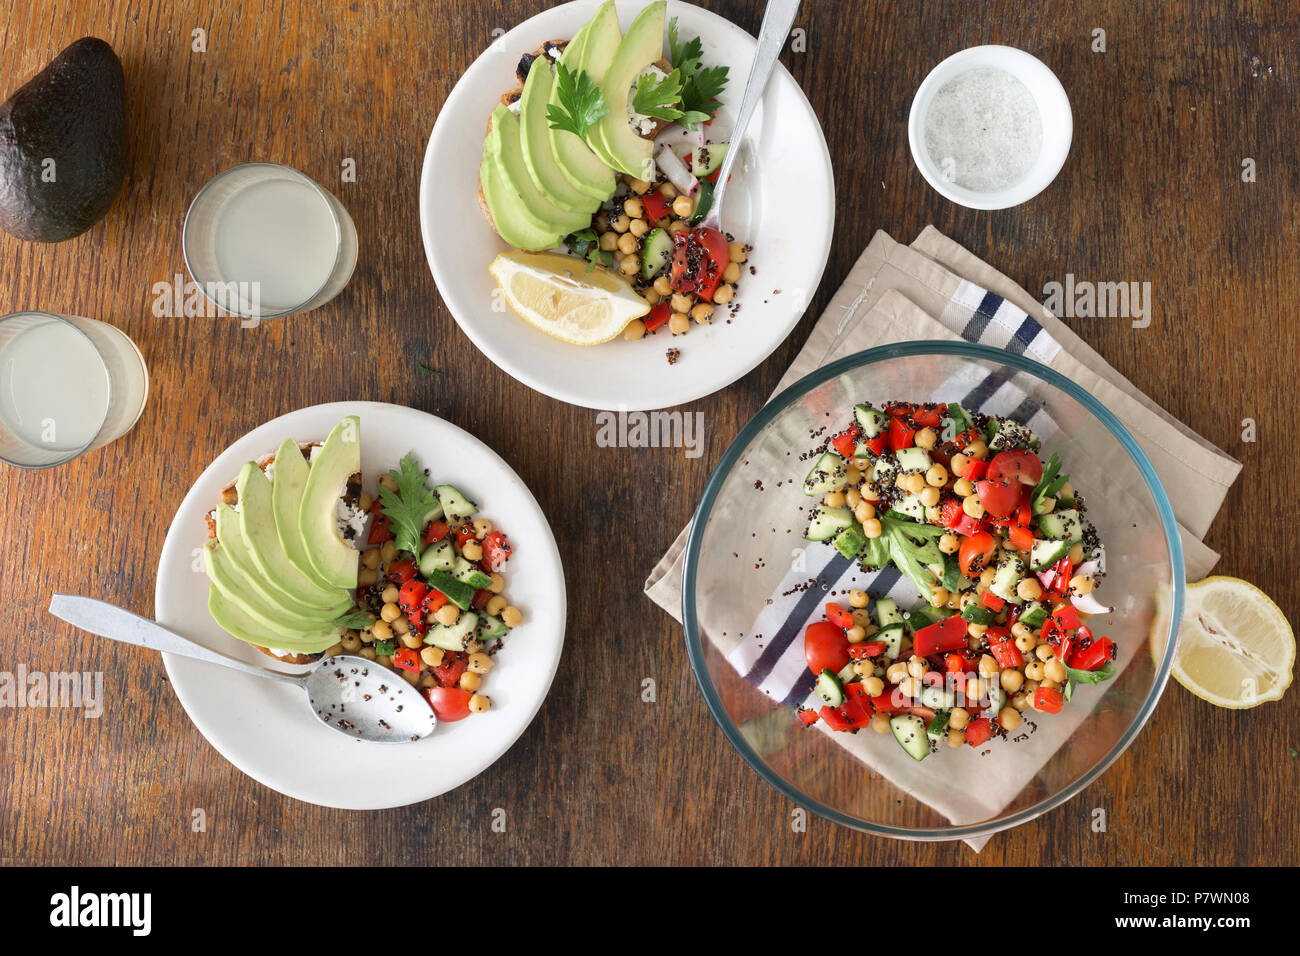 Summer Vegetarian Salad of Black quinoa, chickpeas, peppers, cucumber, tomatoes and parsley with avocado toast and homemade lemonade on wooden table t Stock Photo